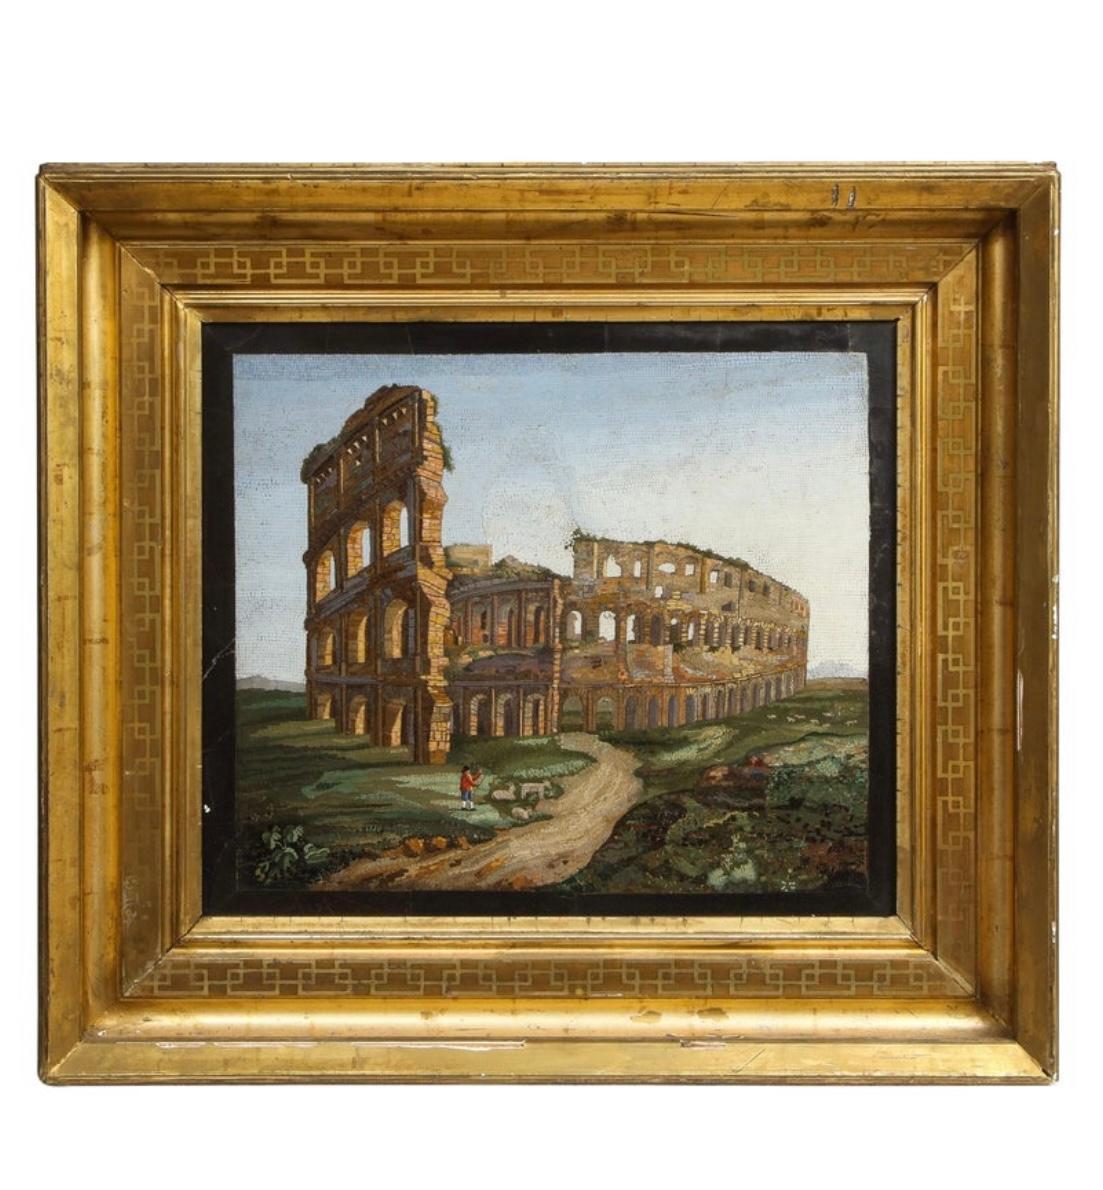 Important Large Micromosaic Depicting The Colosseum in Rome

Circa 1850's, Italy

Measurements: Micromosaic without Frame: approximately 16.75 x 19.25 inches
Frame: approximately 28.38 x 25.63 inches.
